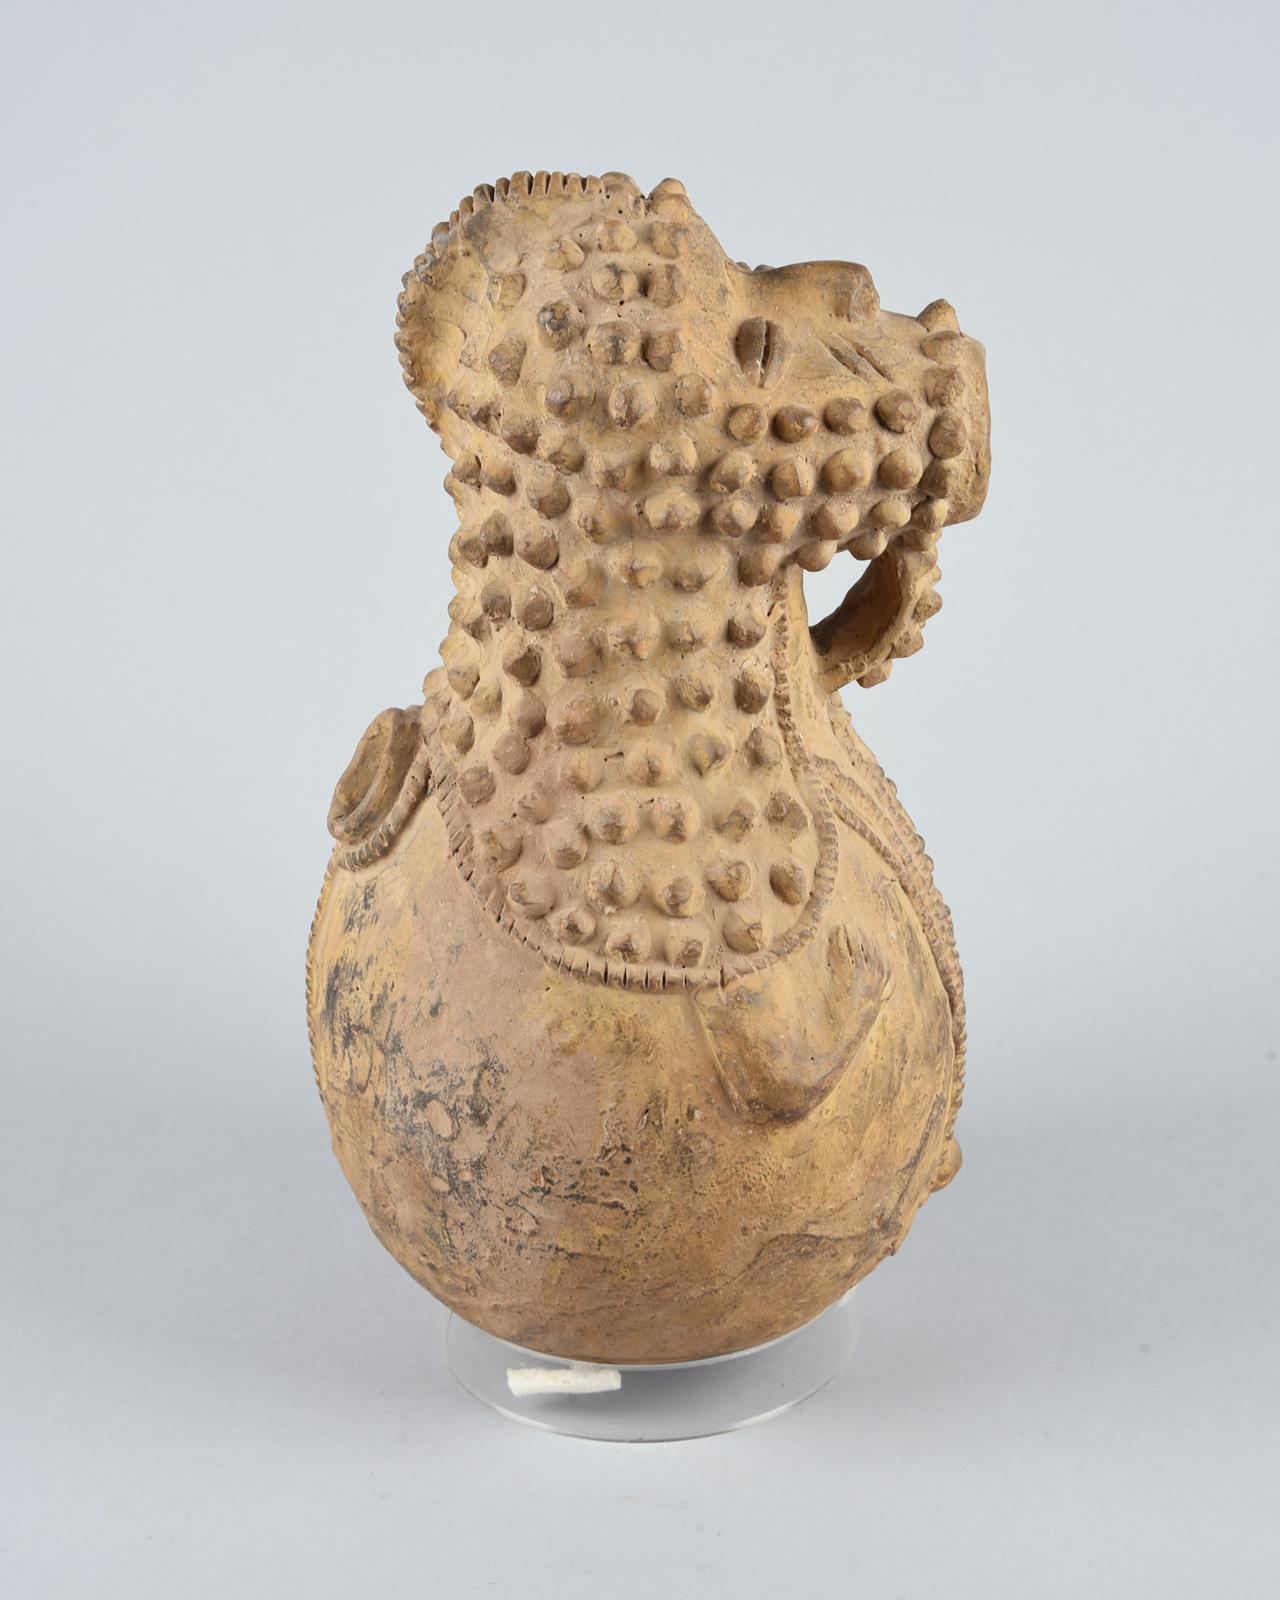 A Ganda spirit vessel Nigeria pottery, of bulbous form with relief decoration and a pair of arms, - Image 4 of 4